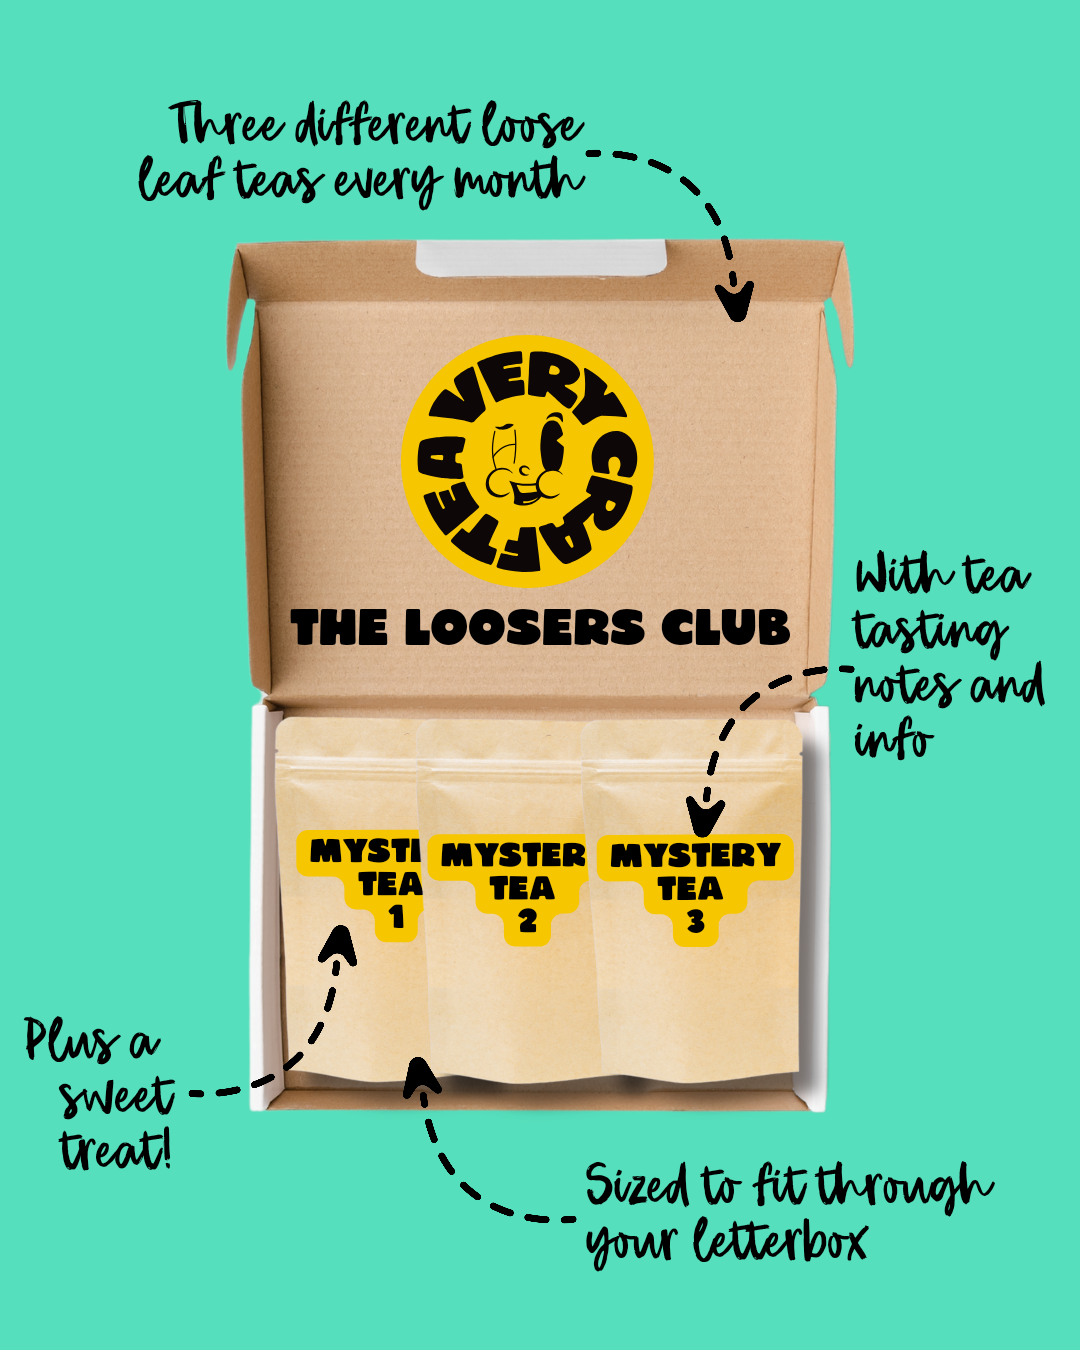 THE LOOSERS CLUB - SUBSCRIPTION BOX